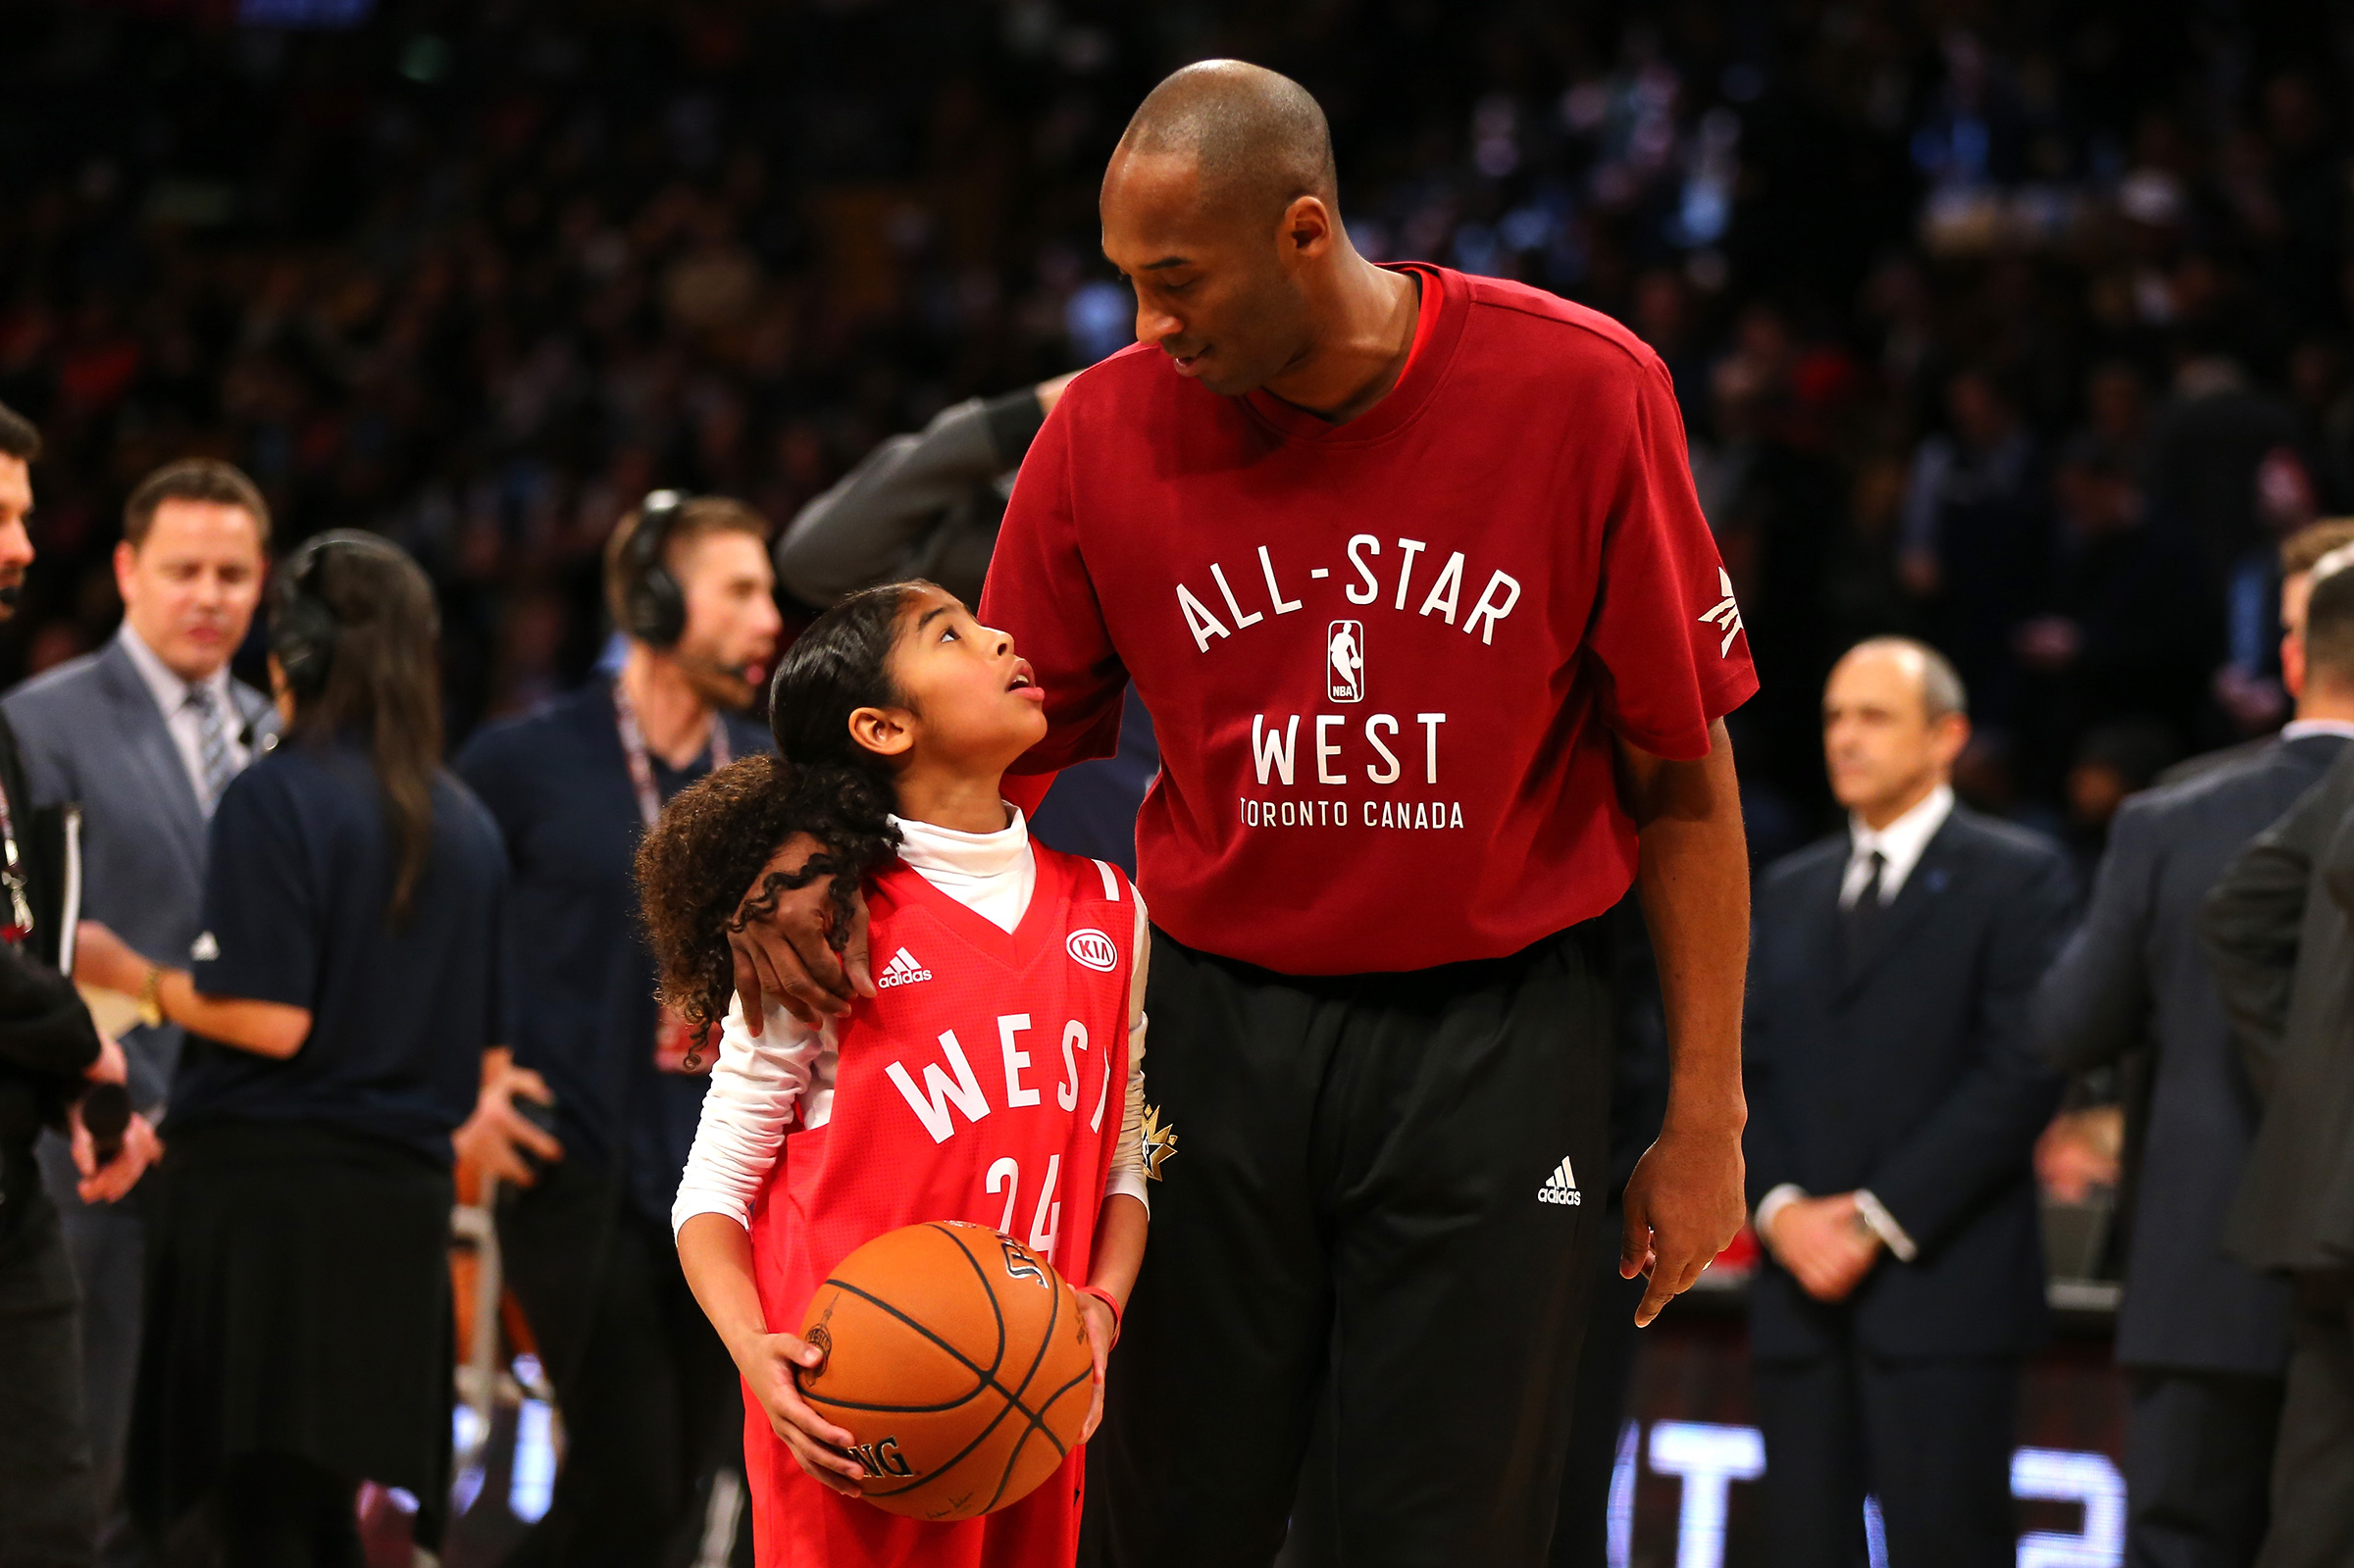 Kobe Bryant warms up with daughter Gianna Bryant during the NBA All-Star Game on Feb. 14, 2016. (Elsa—Getty Images)